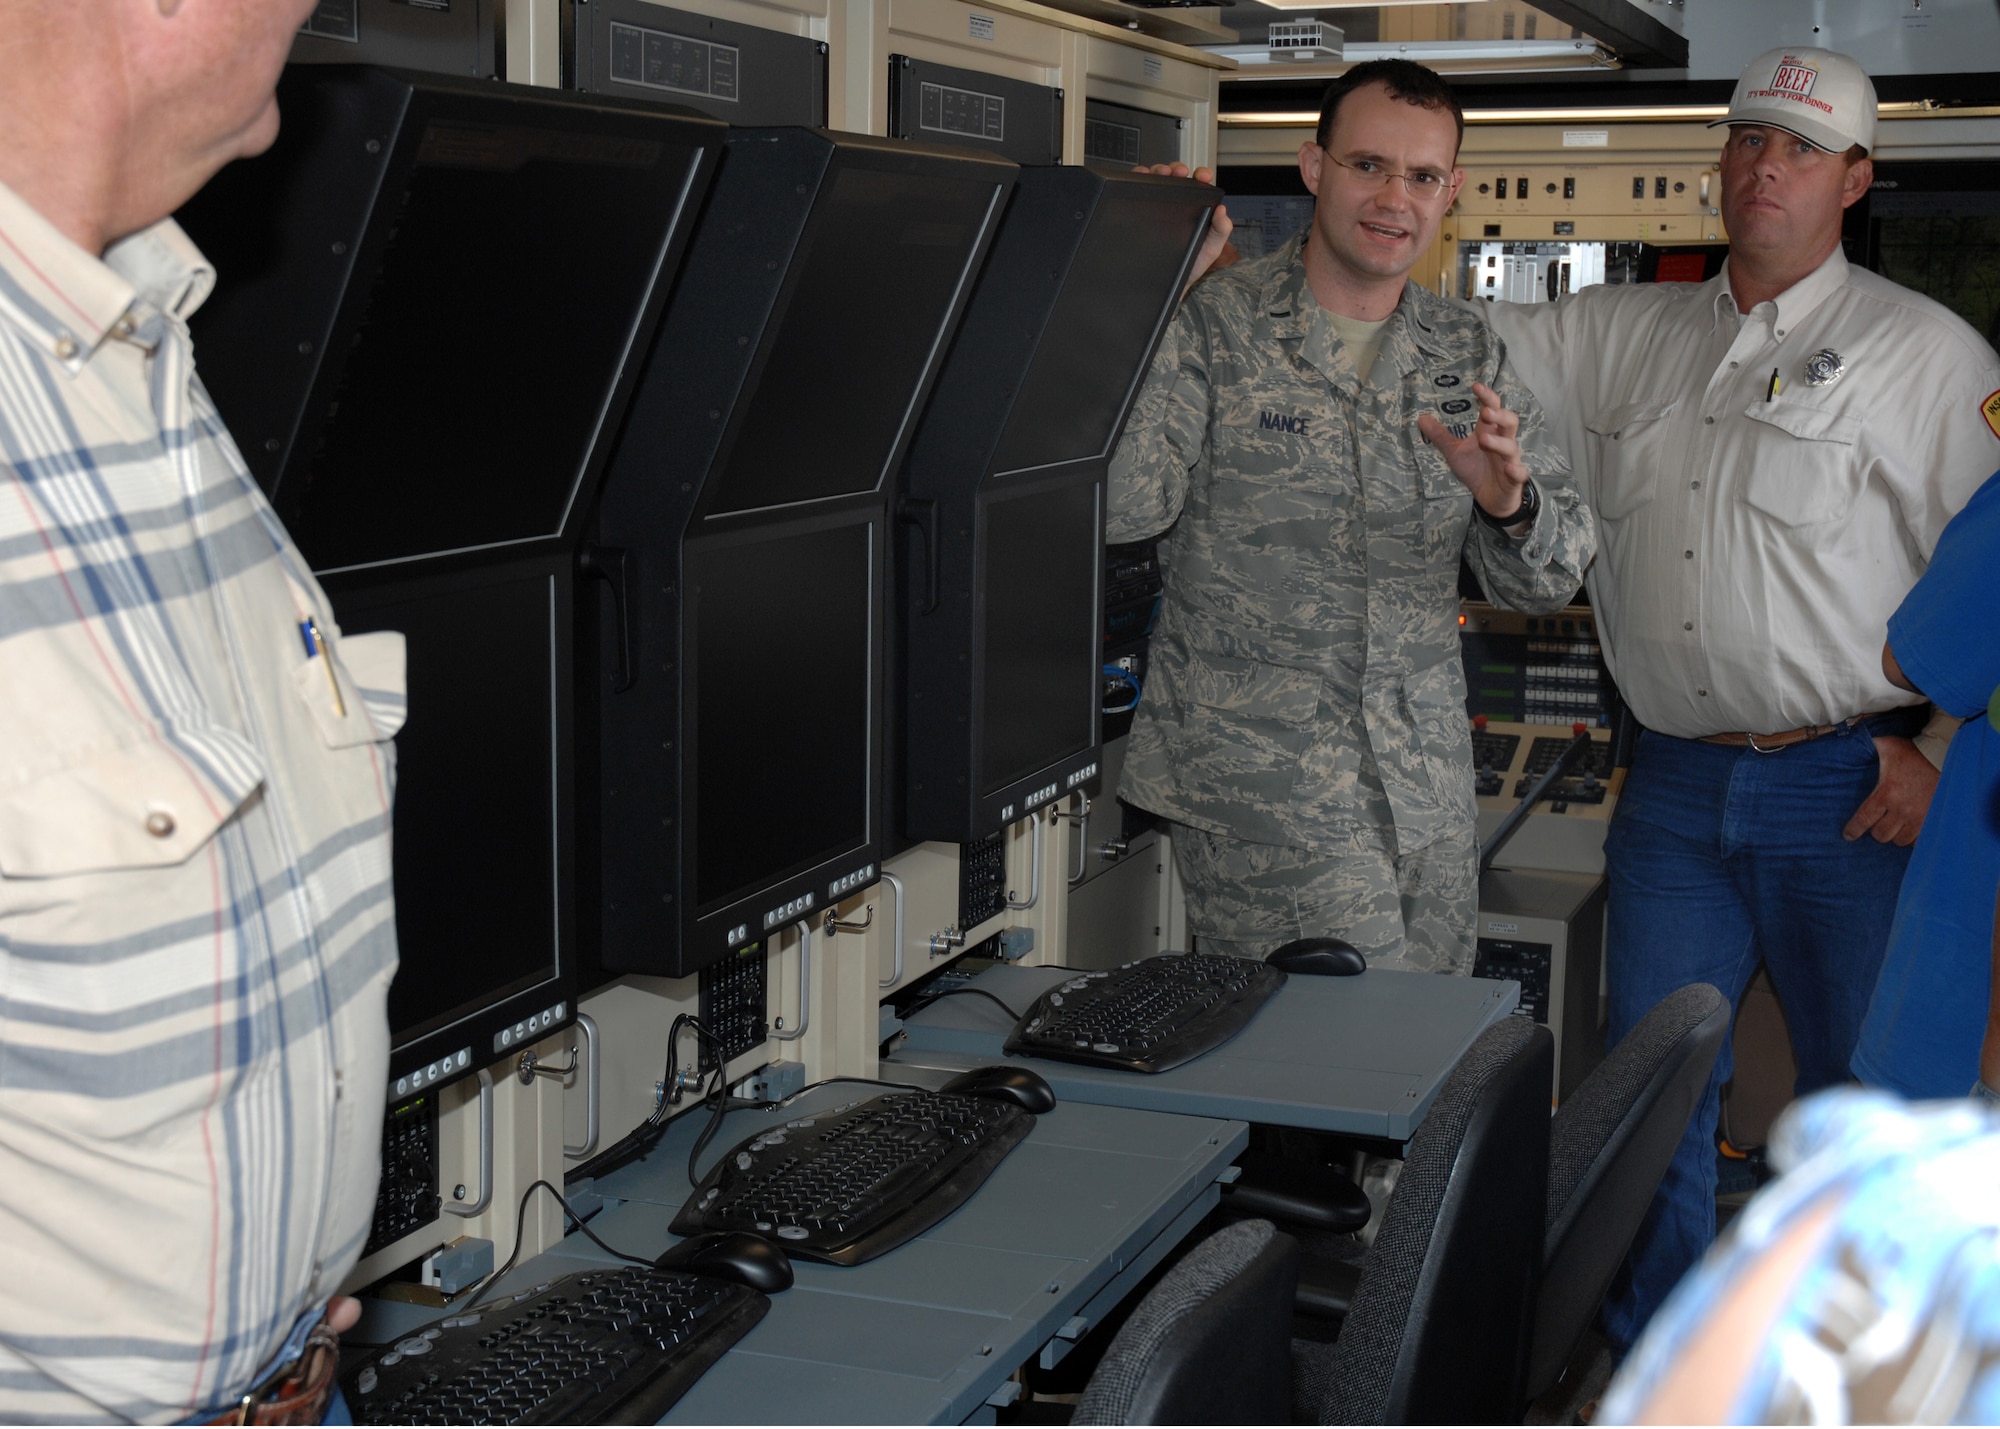 CANNON AIR FORCE BASE, N.M. - First Lt. Charles Nance, 3rd Special Operation Squadron Assistant Chief of Current Operations, explains to an audience of contractors the technology in the 3rd SOS's Dragon Operations Center July 10, 2008, at a barbeque the squadron held for contractors who helped build the facility.  The operations building project provided a first-class, flexible facility that can accommodate all personnel.  The effective management of this project by 3rd SOS personnel helped the squadron win the covetous 2008 Air Force Special Operations Command Meritorious Unit Award for the period of Oct. 1, 2007 to Sept. 30, 2008. (U.S. Air Force photo/Airman 1st Class Danielle Martin)